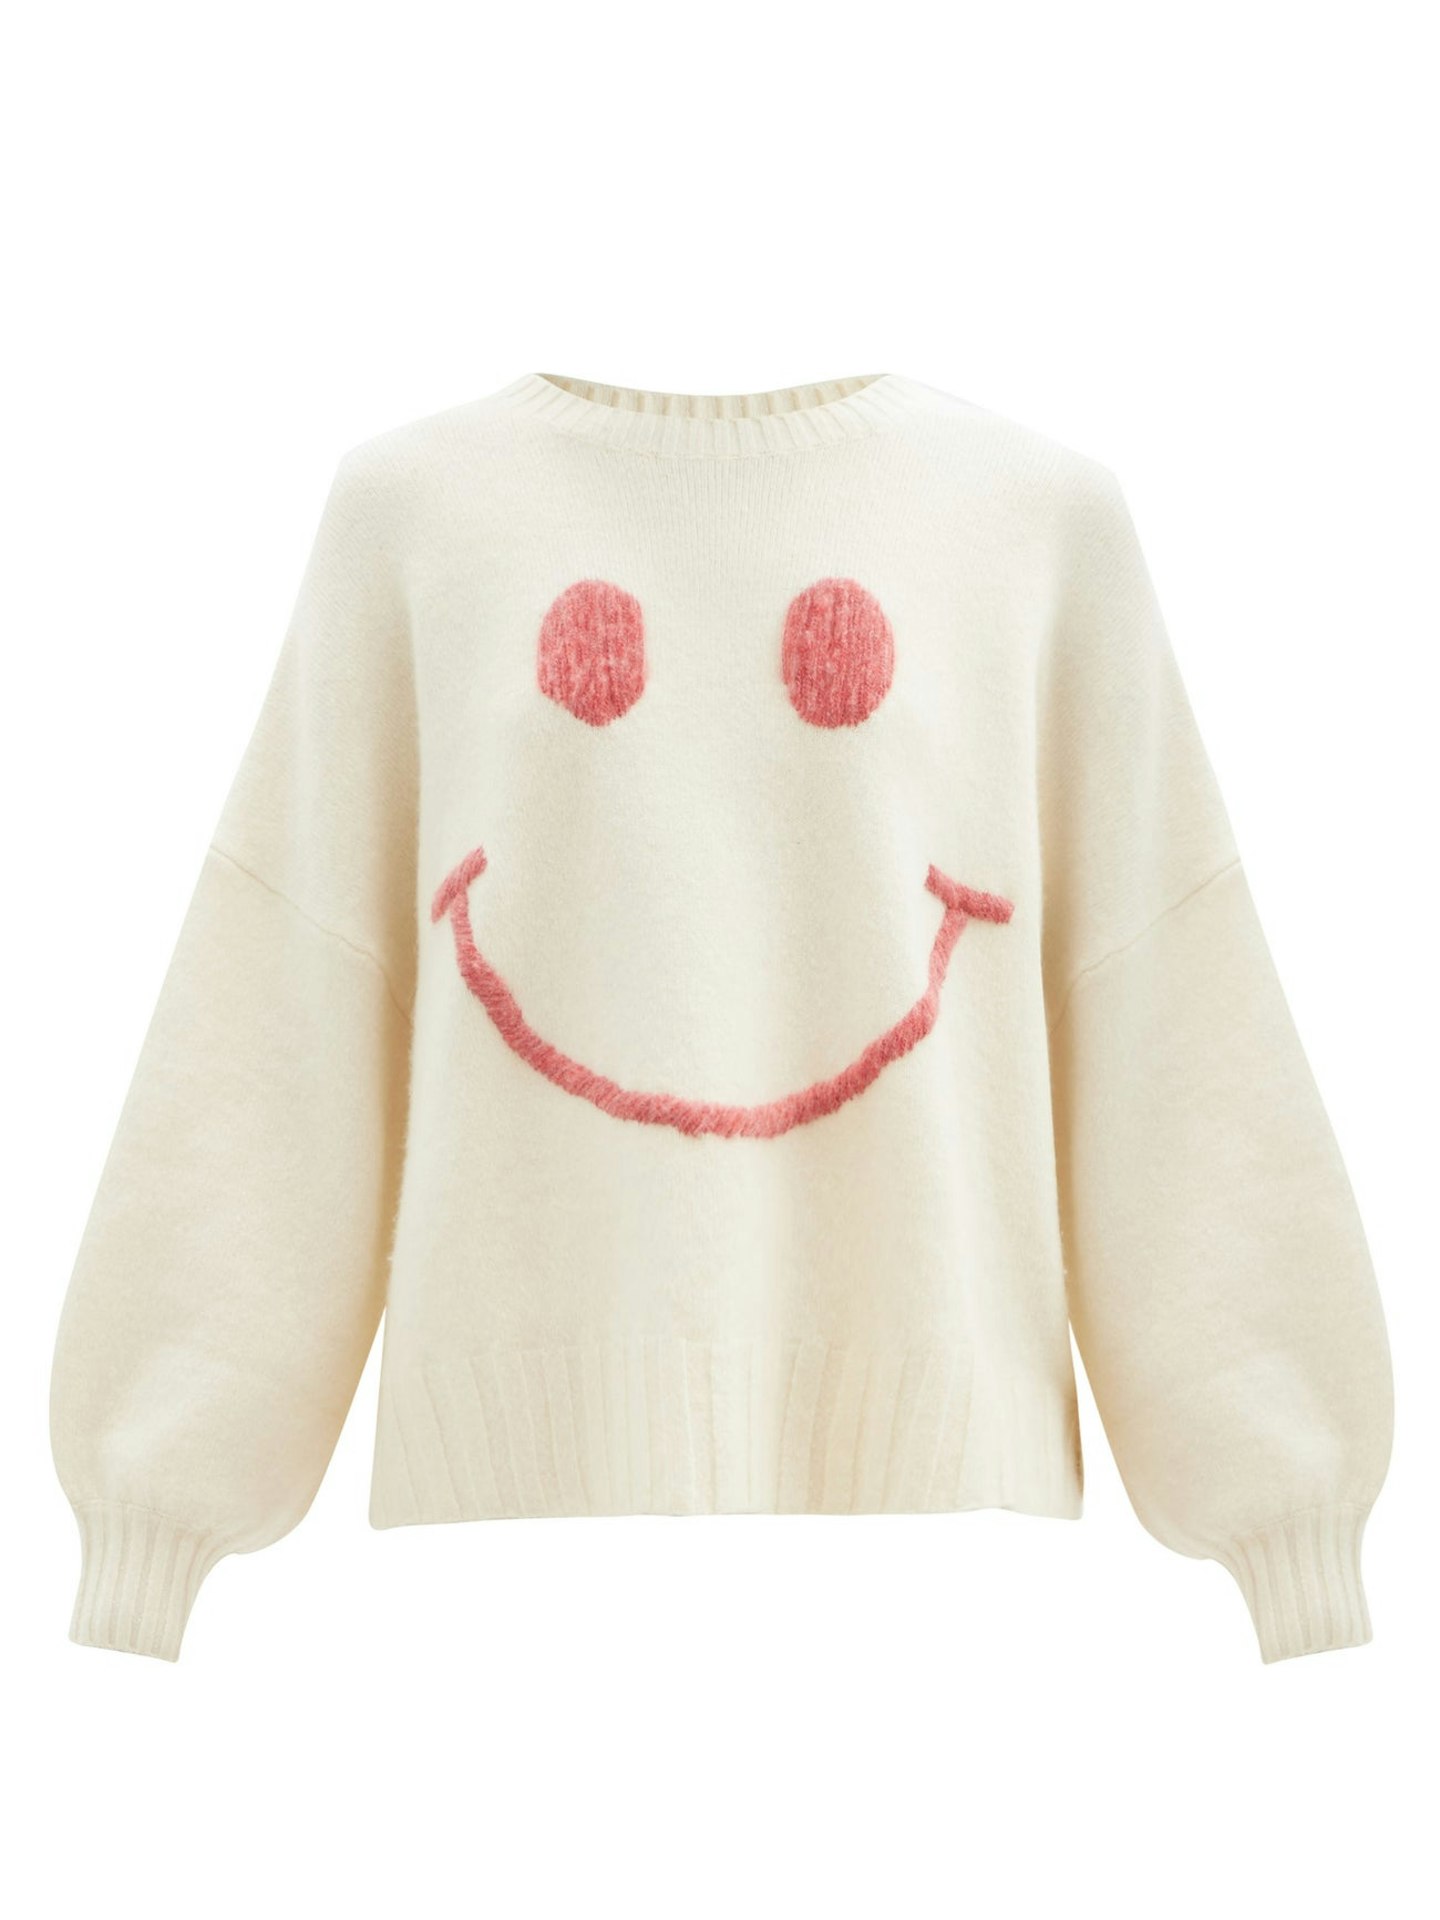 Joostricot, Smiling face-embroidered merino wool-blend sweater, WAS £610 NOW £457.50